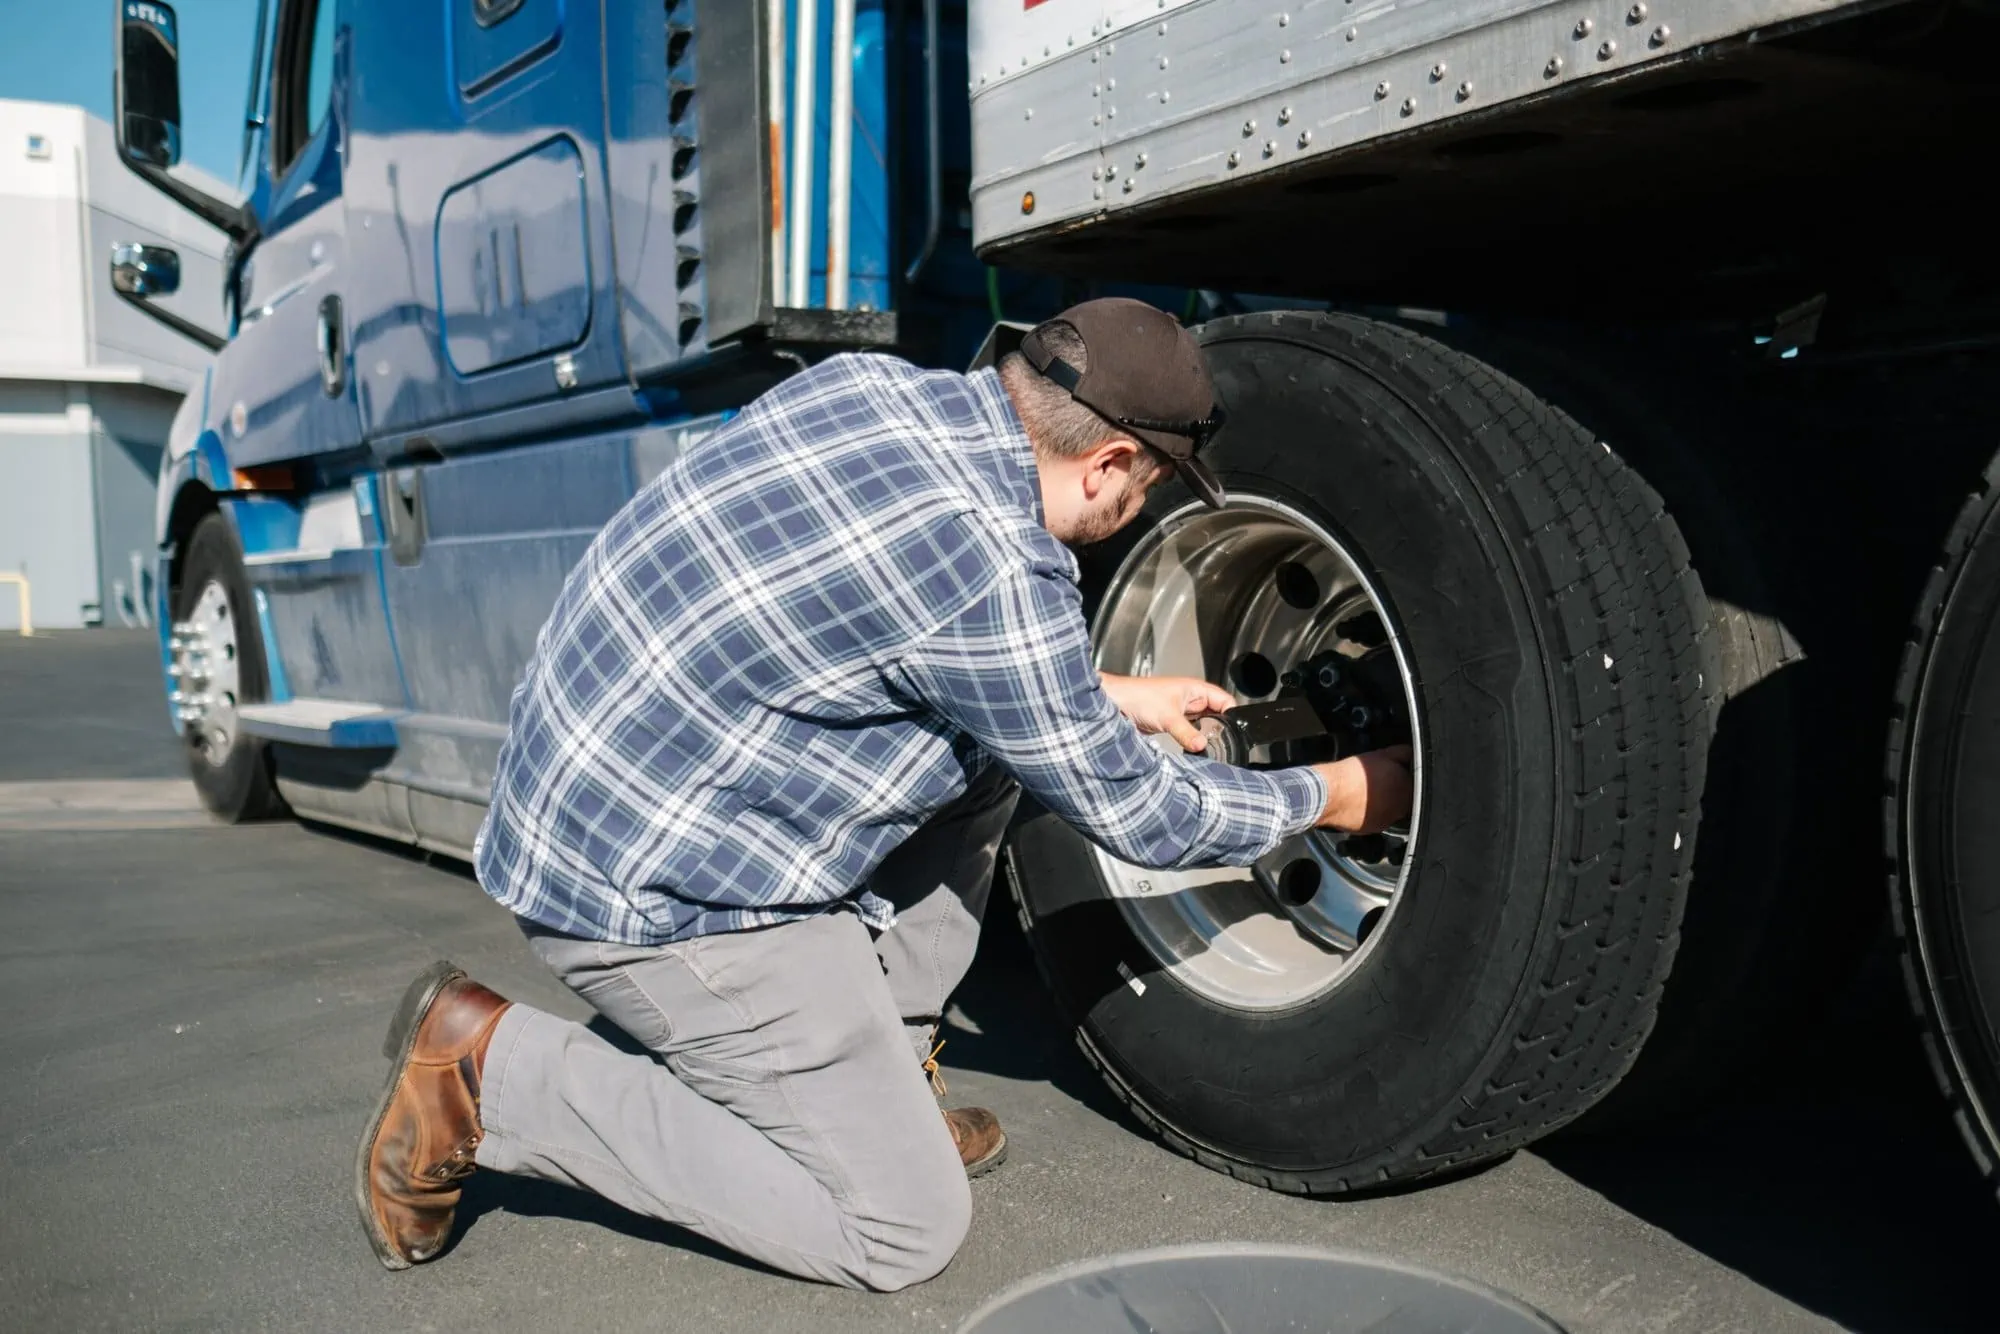 Semi truck driver fixing his tire while wondering that there is not doubt dash cameras are worth it since the system alerted him of truck issue